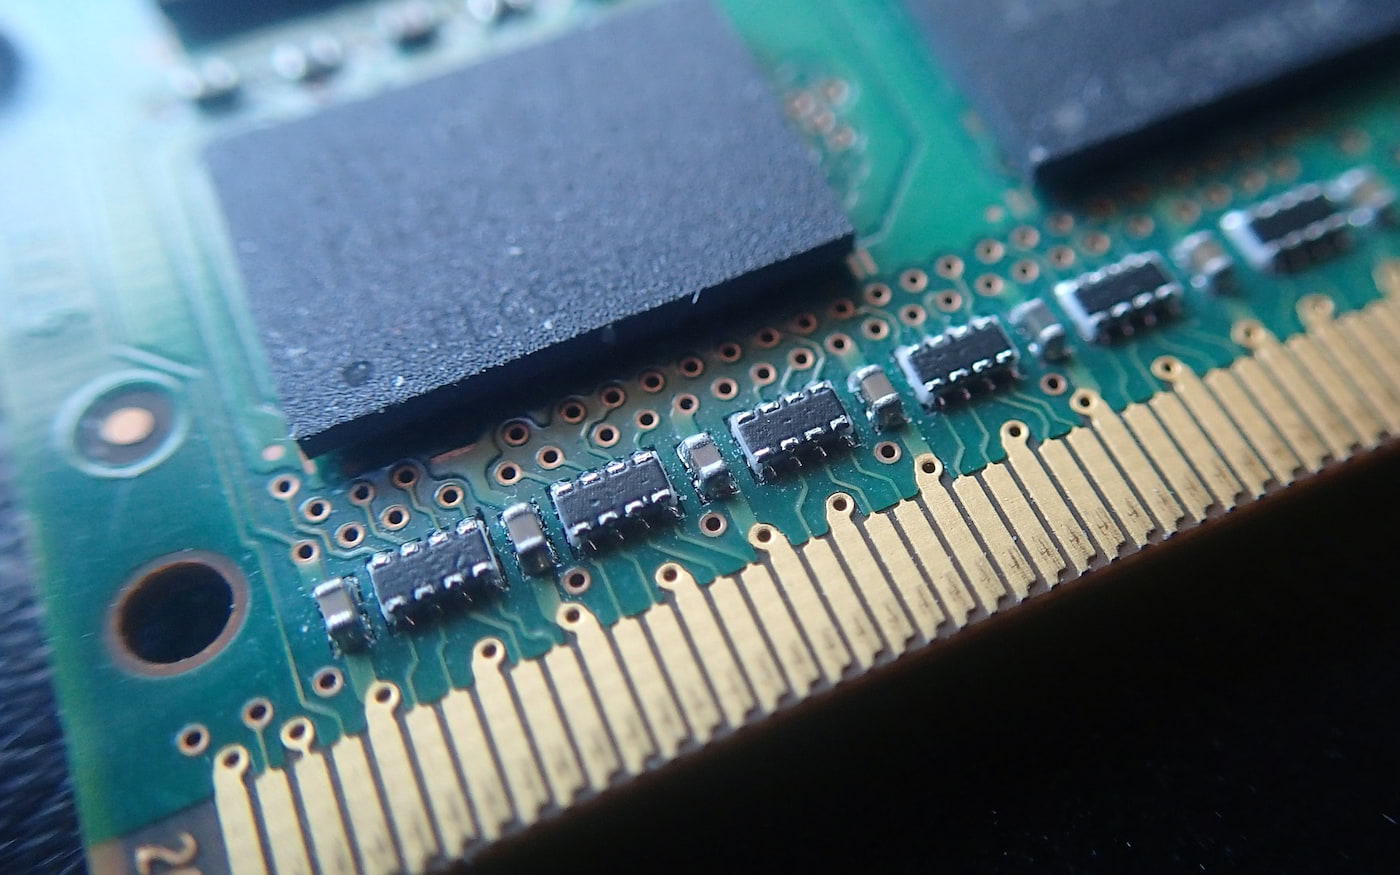 DDR3 1333 or 1600 mhz RAM memory: what's the difference?